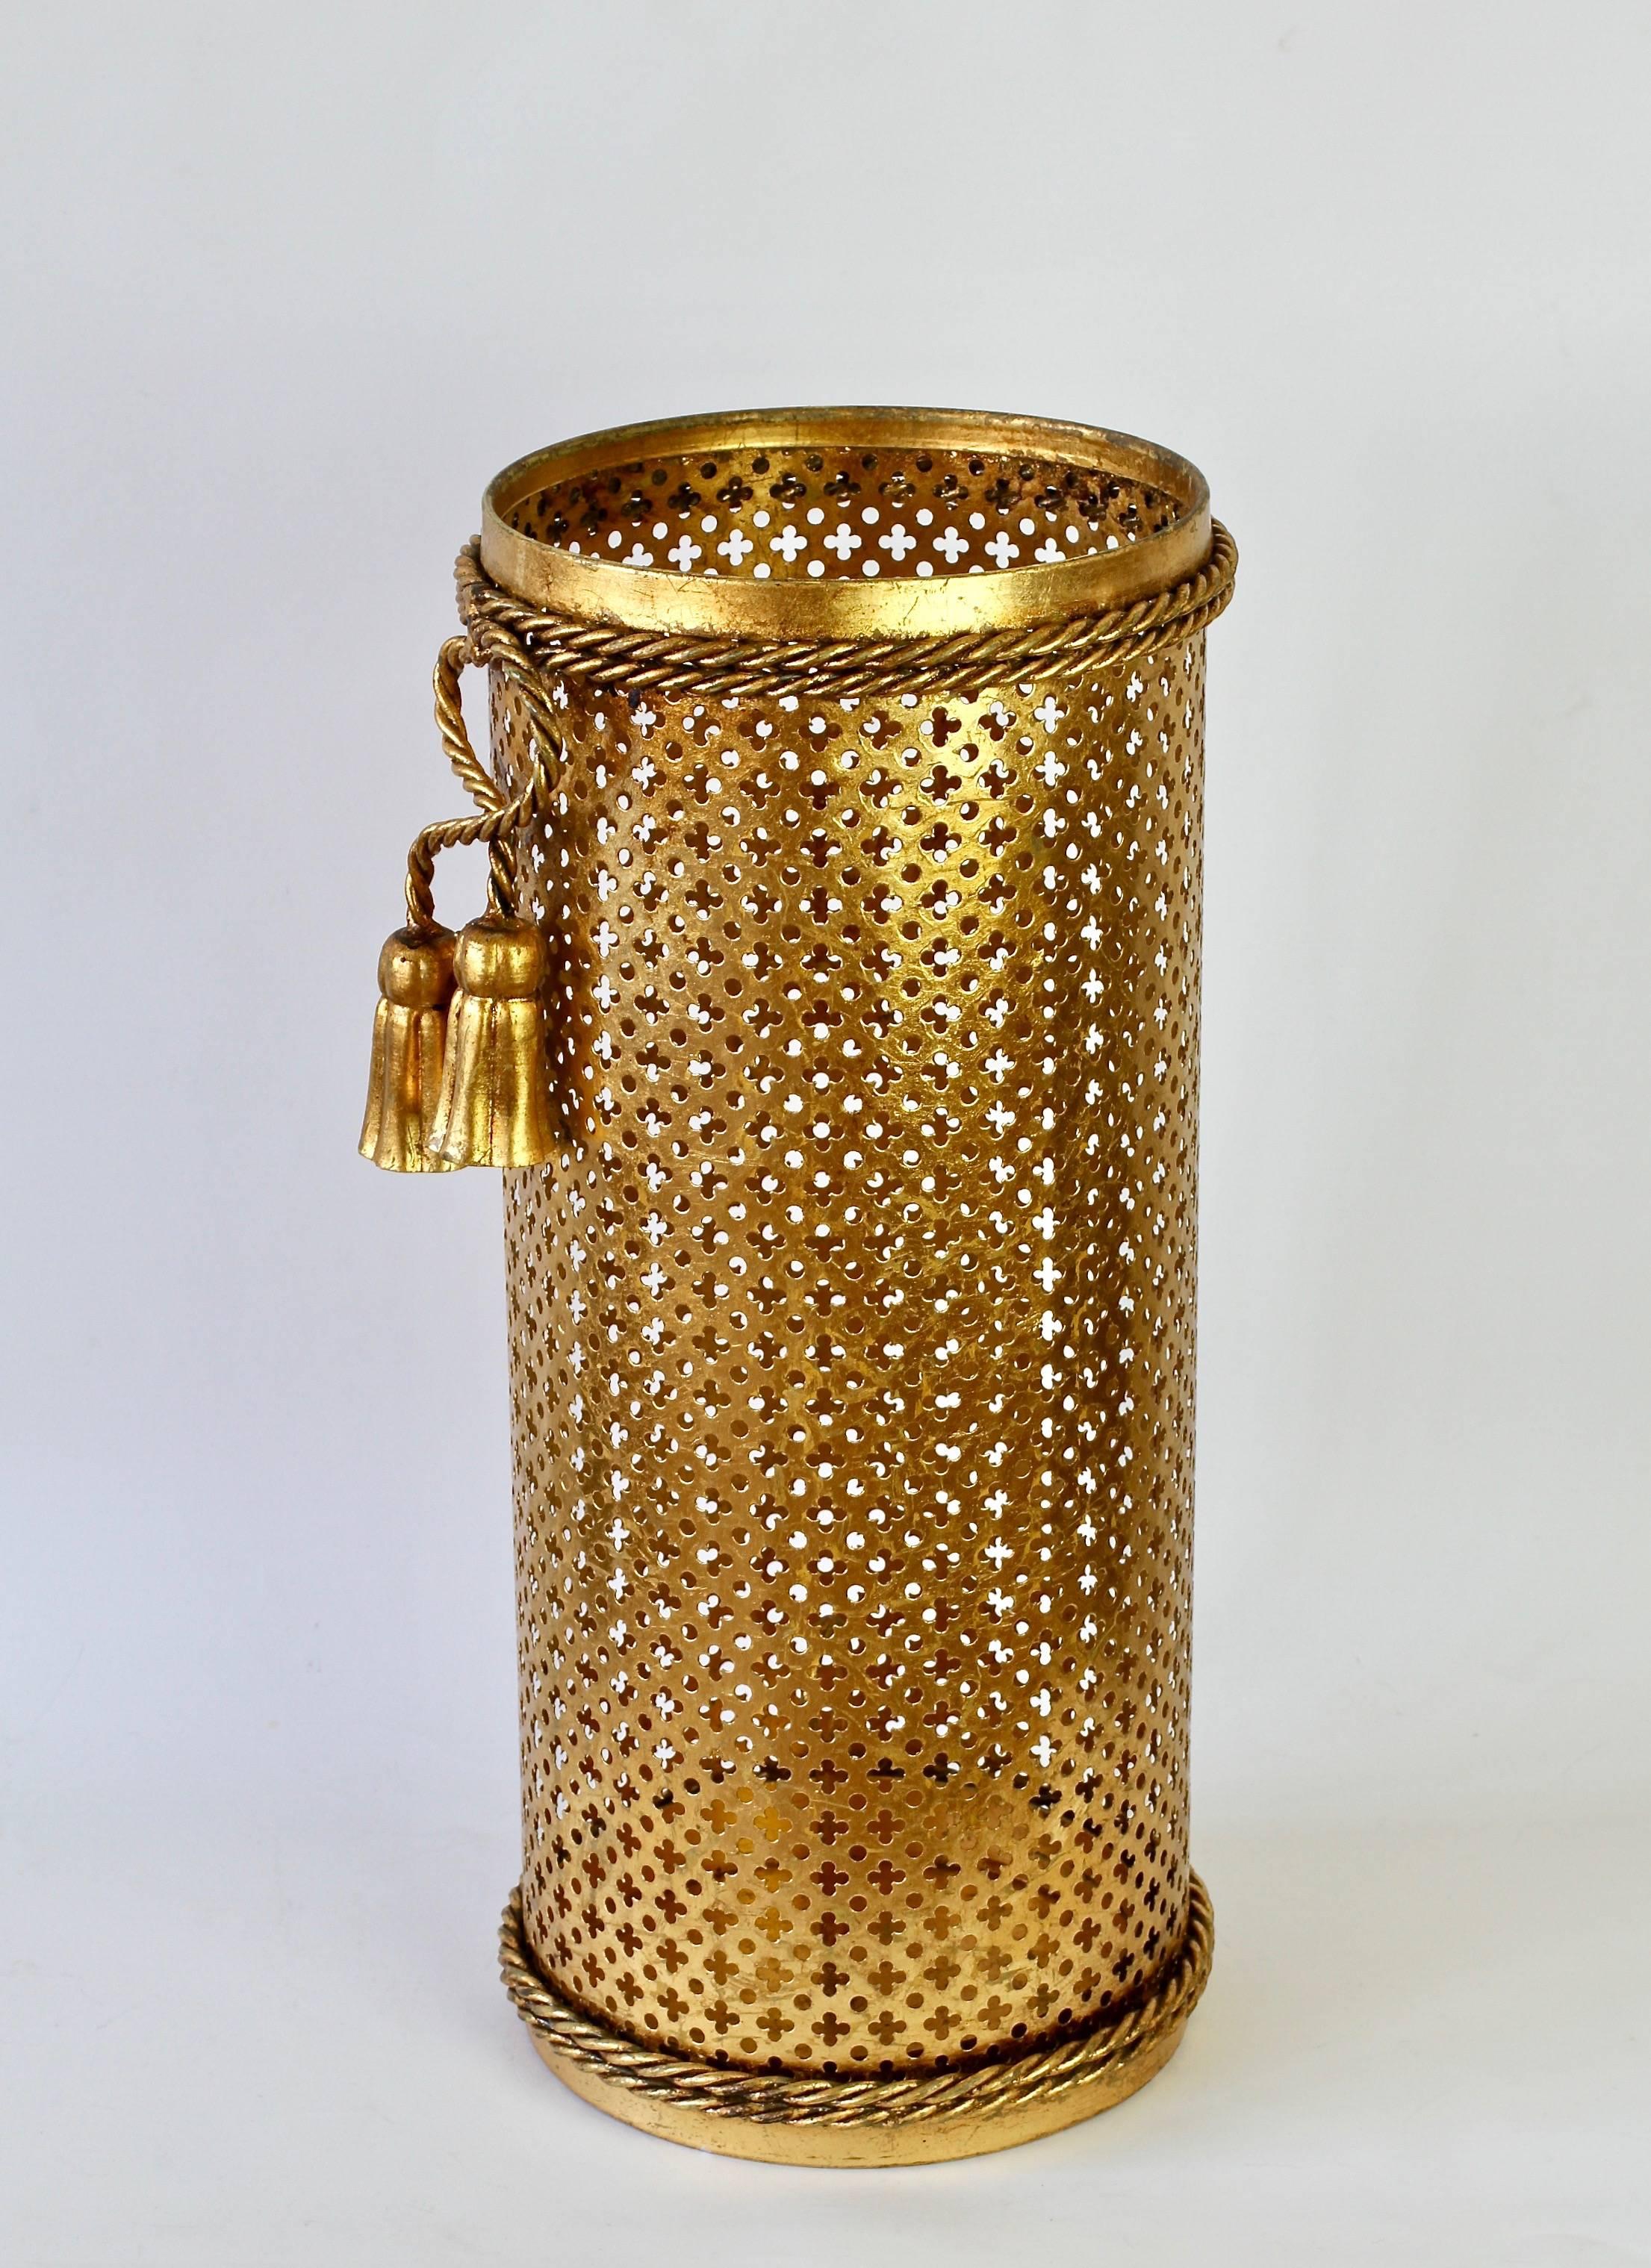 Stunning midcentury gold/gilt/gilded Hollywood Regency style umbrella stand or holder made in France or Italy, circa 1950. The perforated lattice patterned metalwork with bent rope and tassel details finish the piece perfectly. Quite rare to find